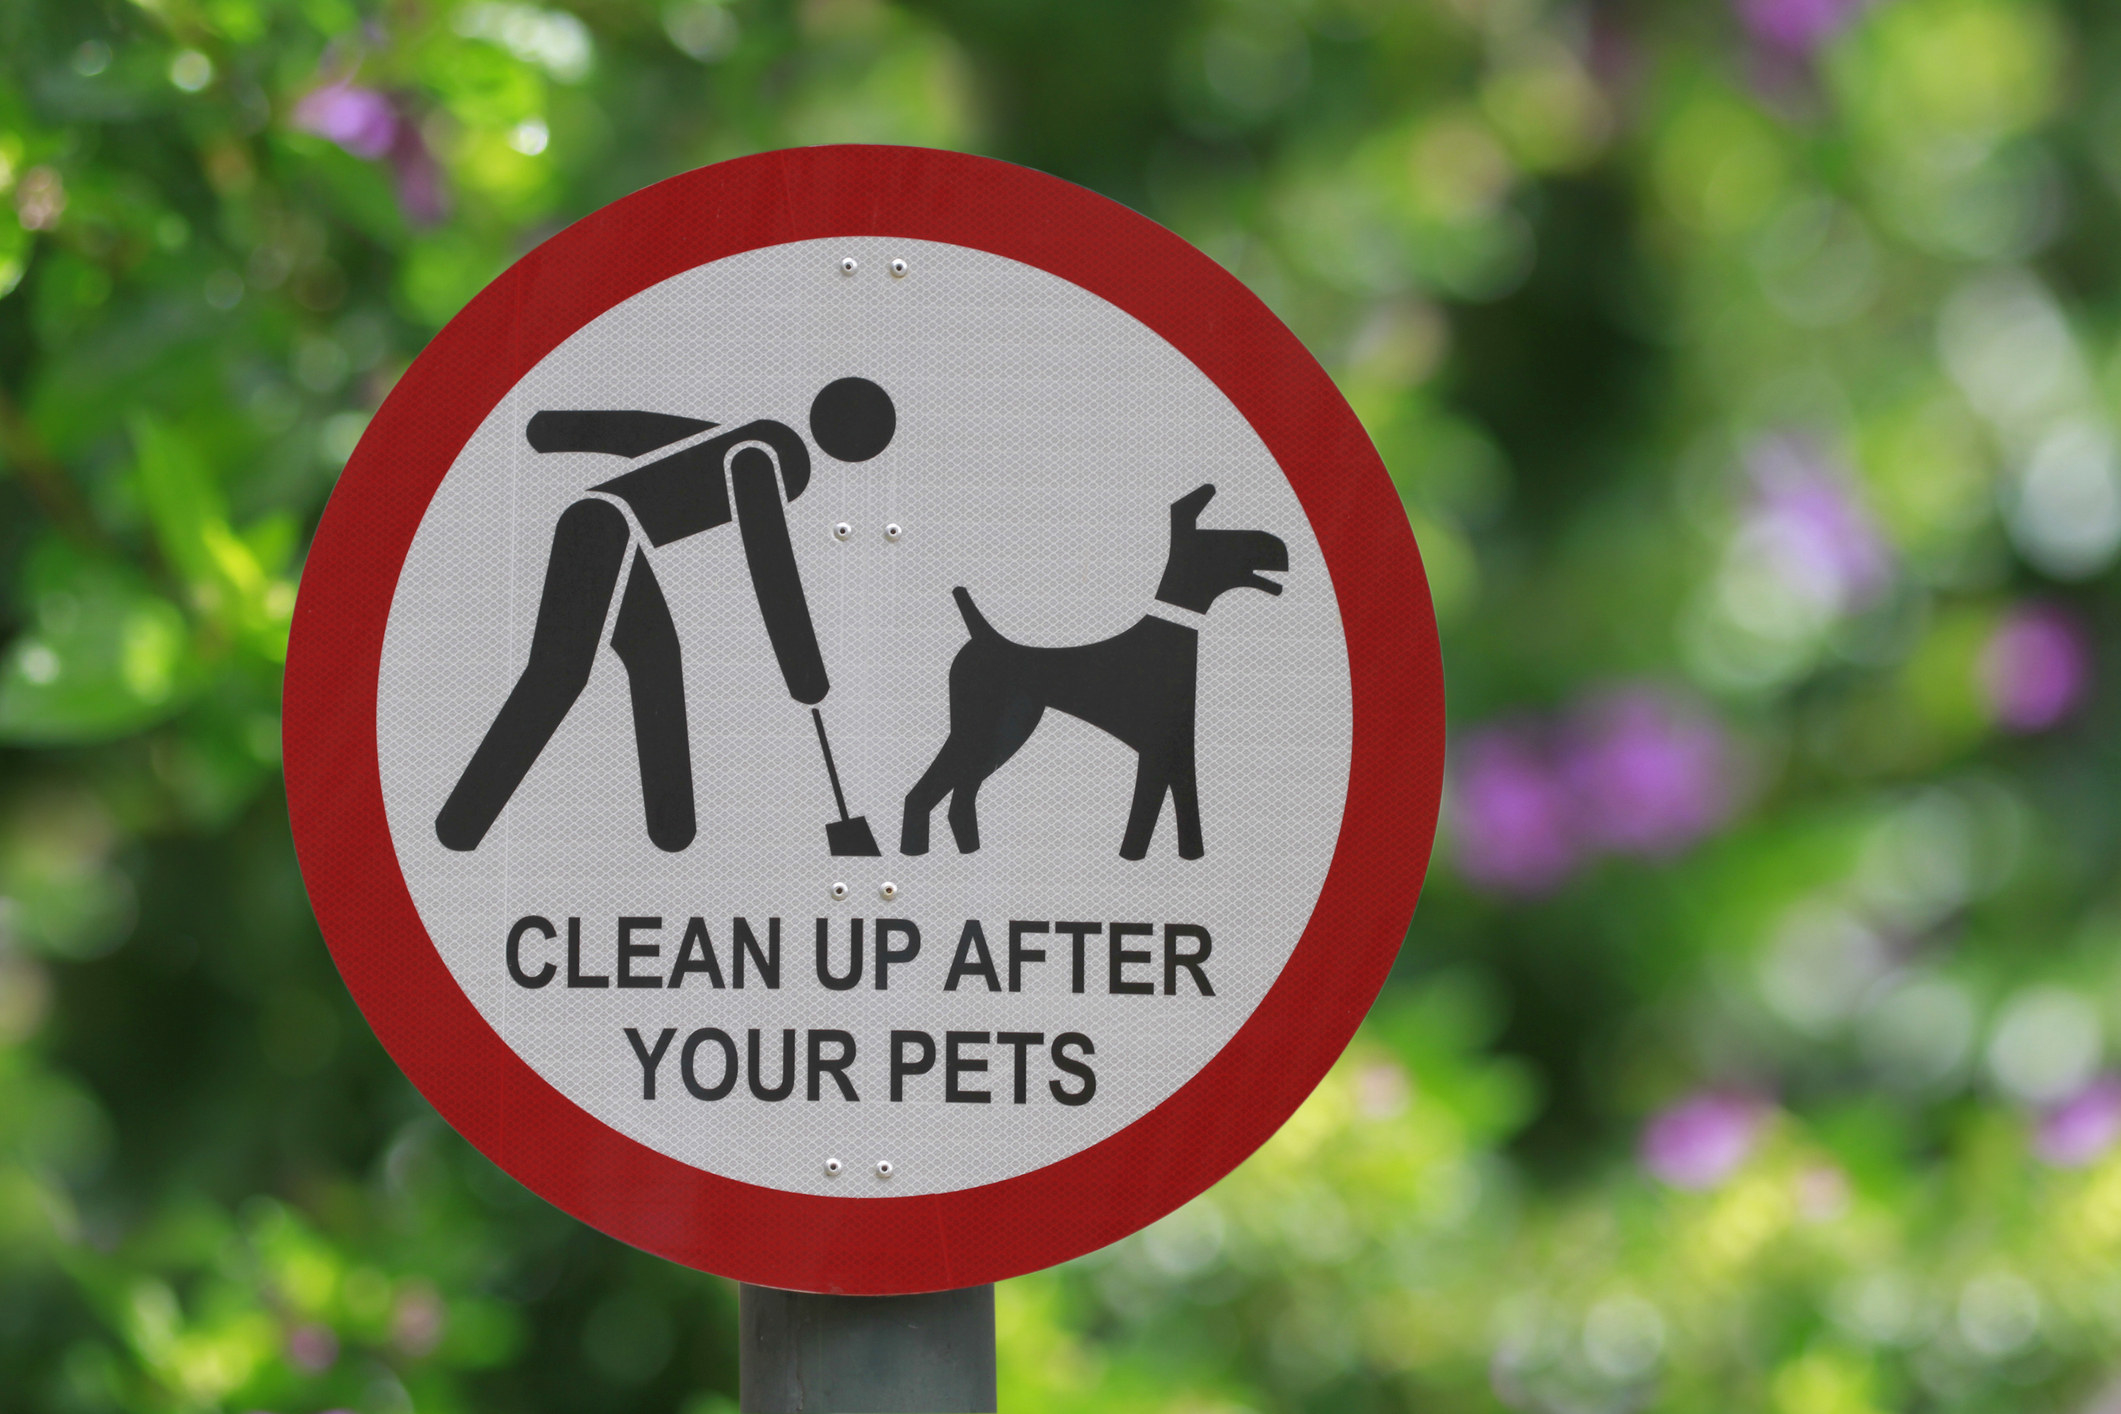 &quot;Clean up after your pets&quot; sign at the park